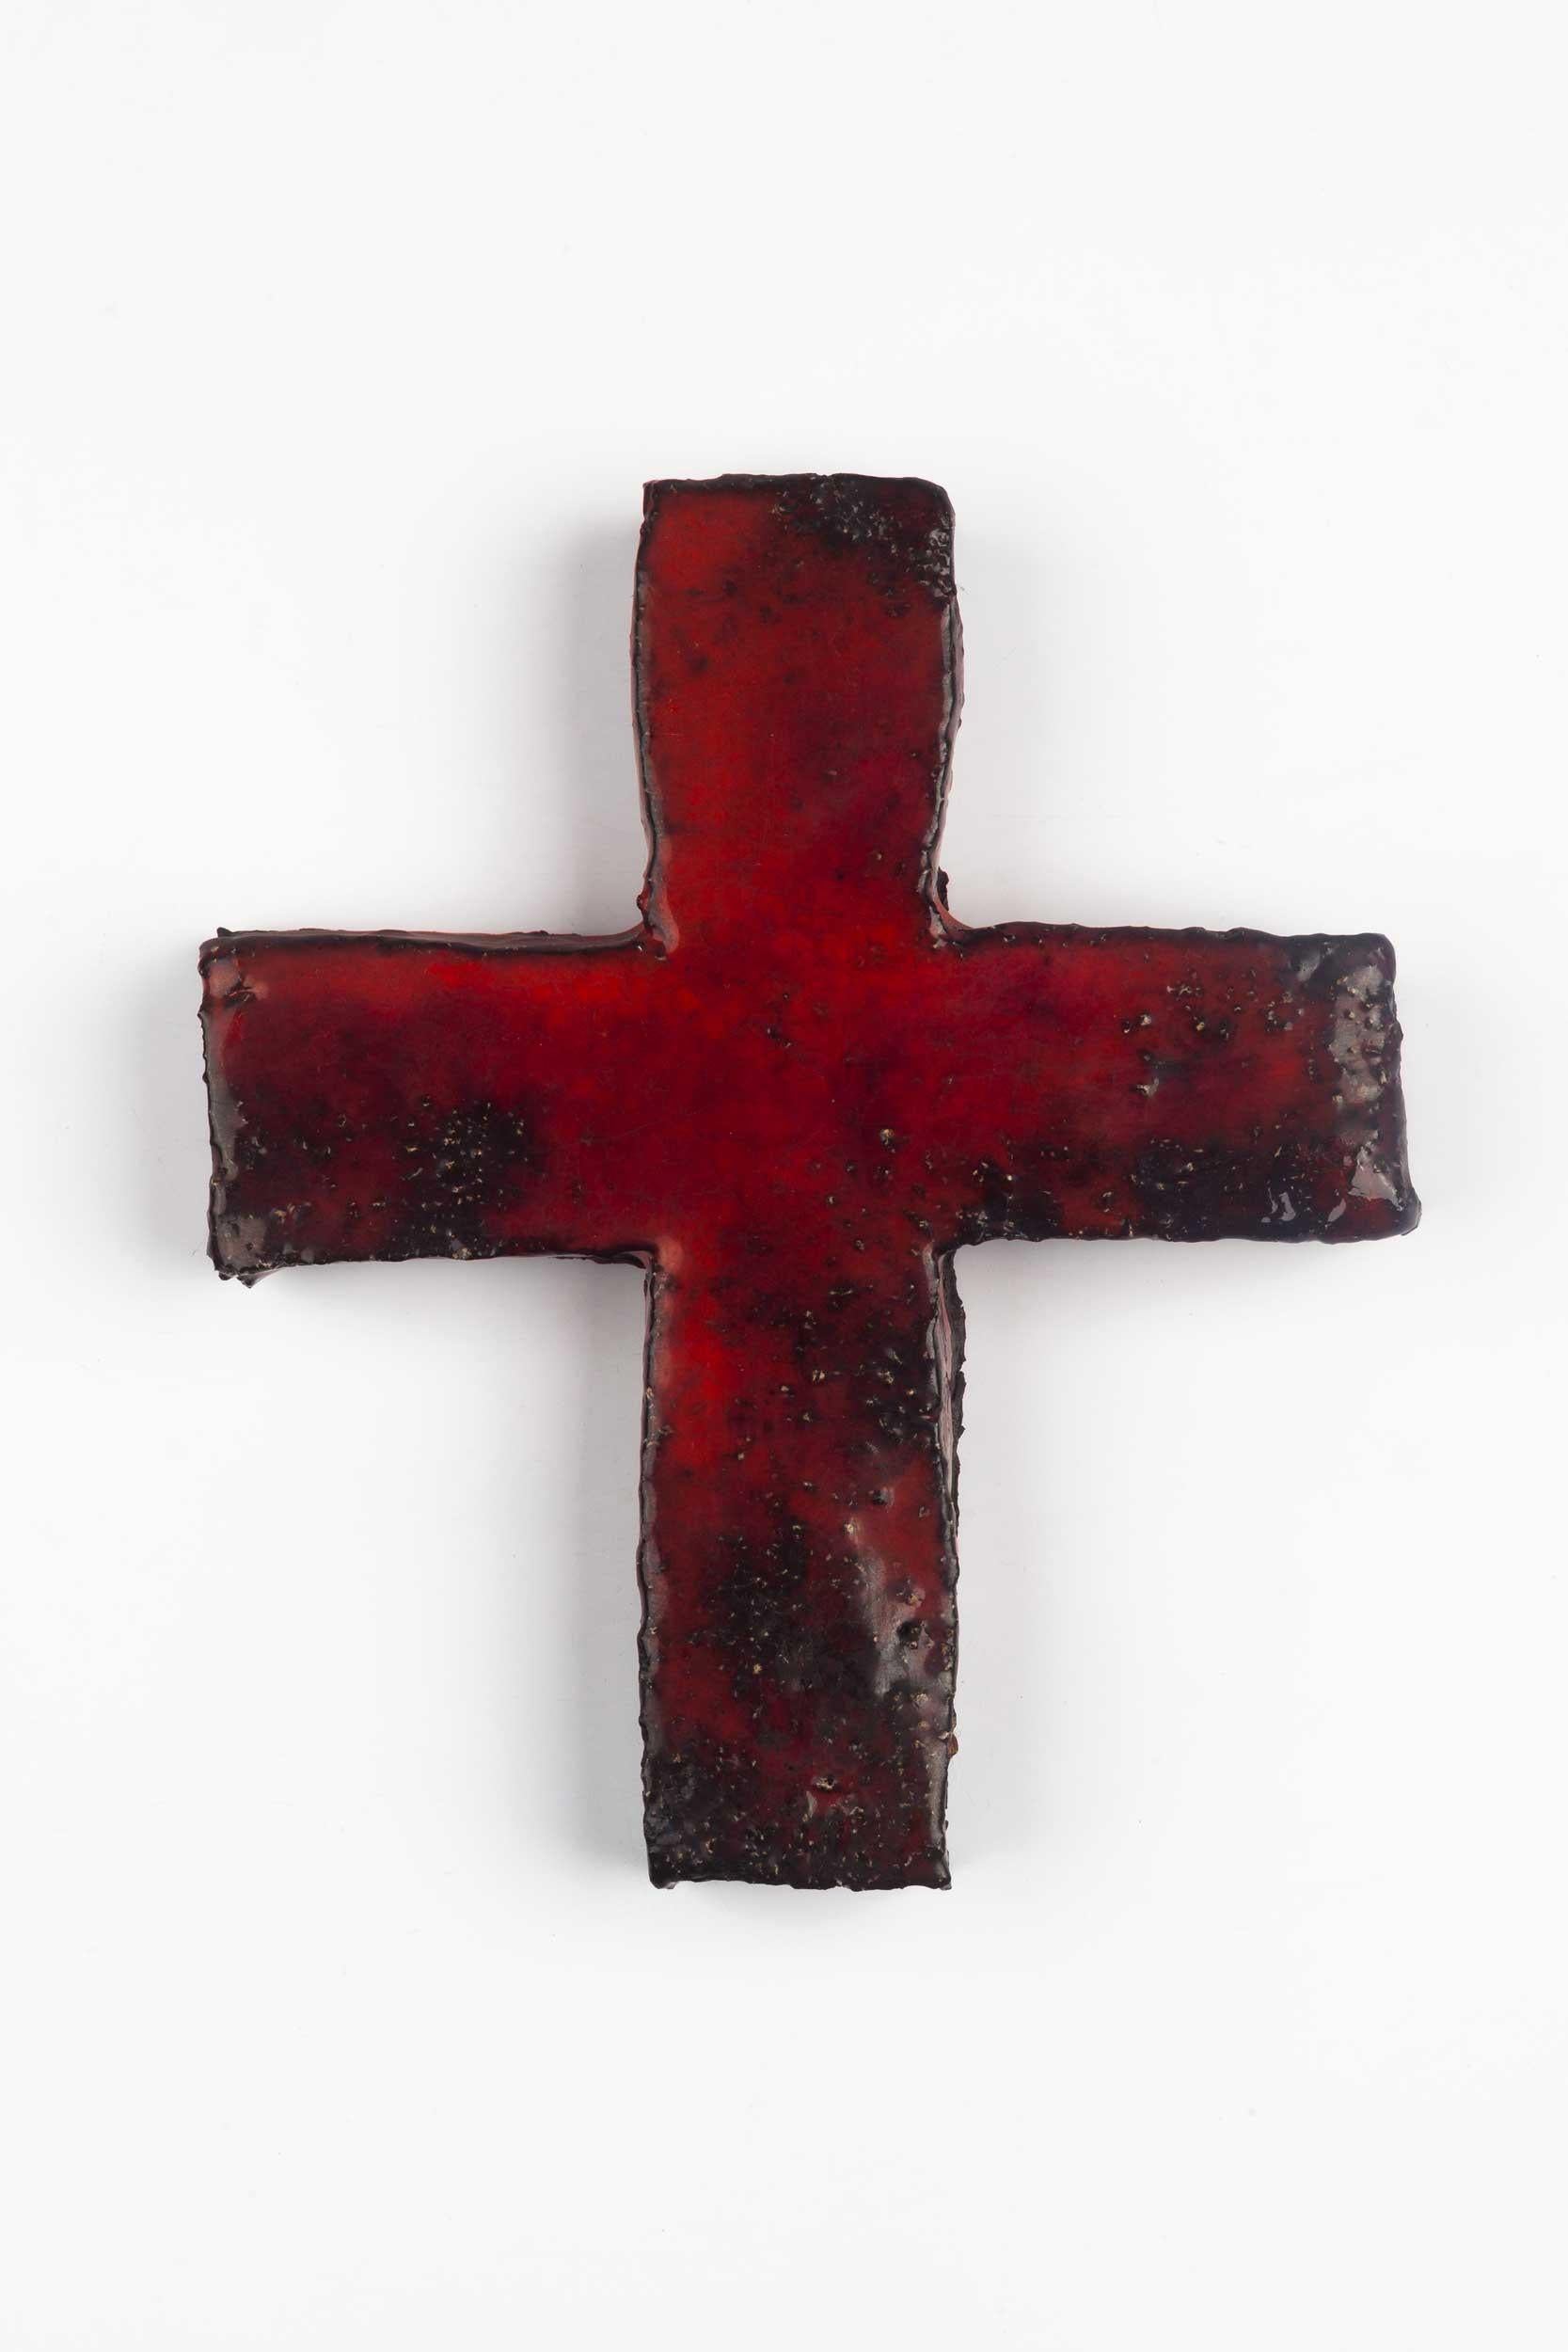 Small, thick, textured cross in glossy glaze with brilliant depth of color in the red and black hand-painted clay. 

Dimensions

H 5 in. x W 5 in. x D 1 in.
 

This piece is part of curated European ceramic crucifix collection, all made in